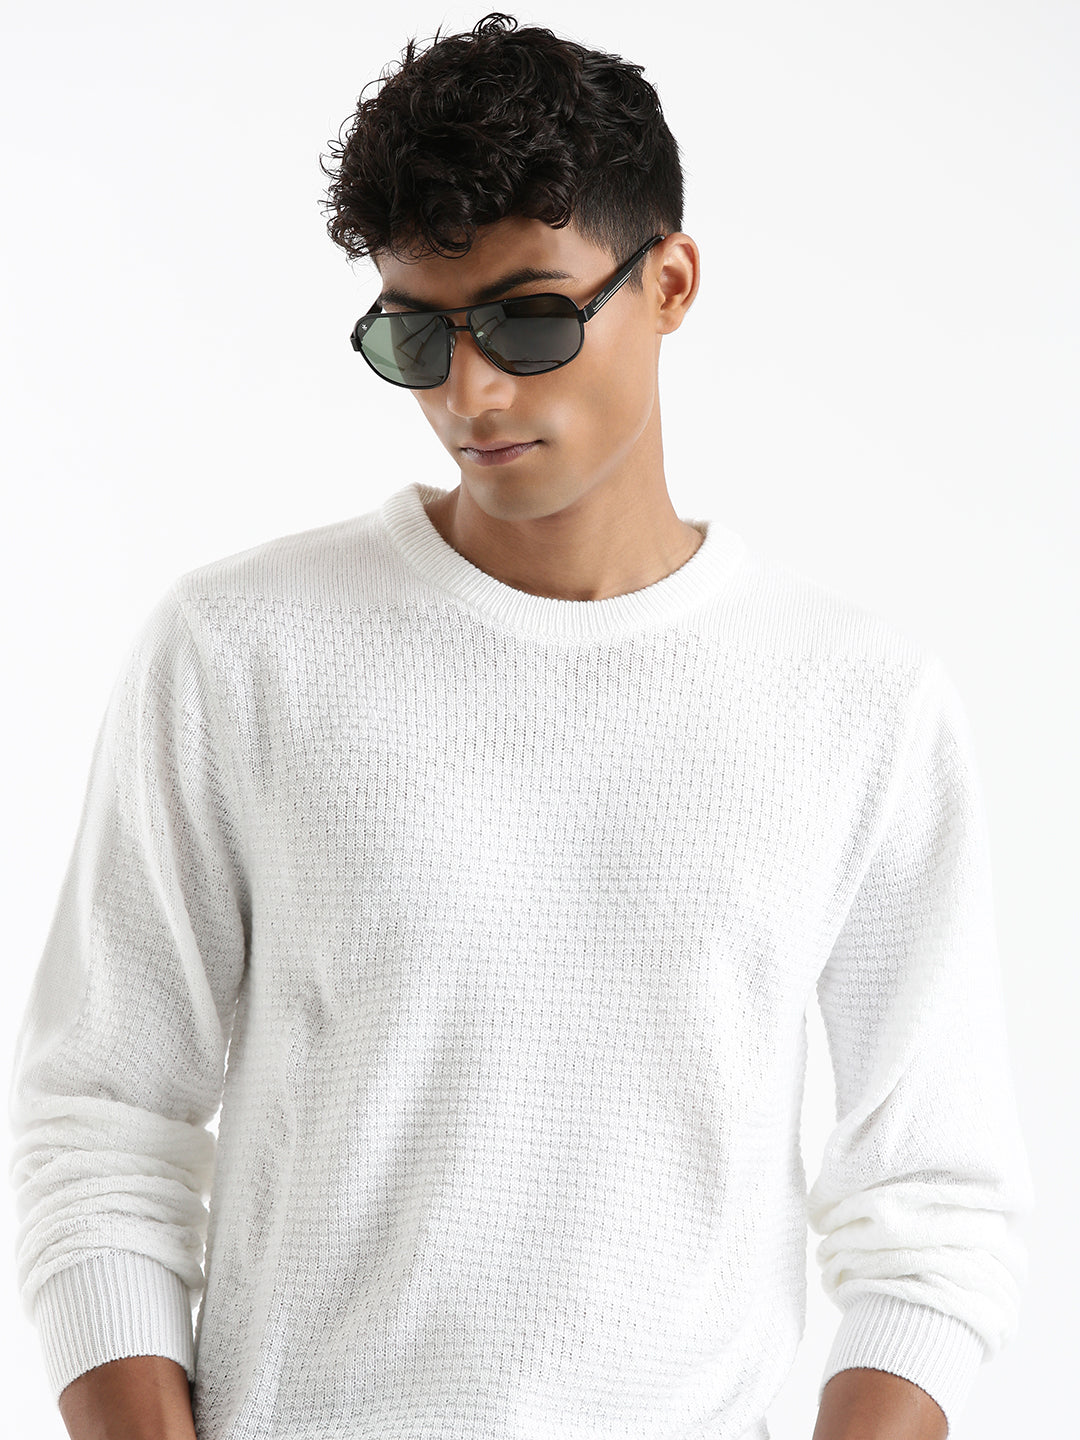 Classic Style White Sweater